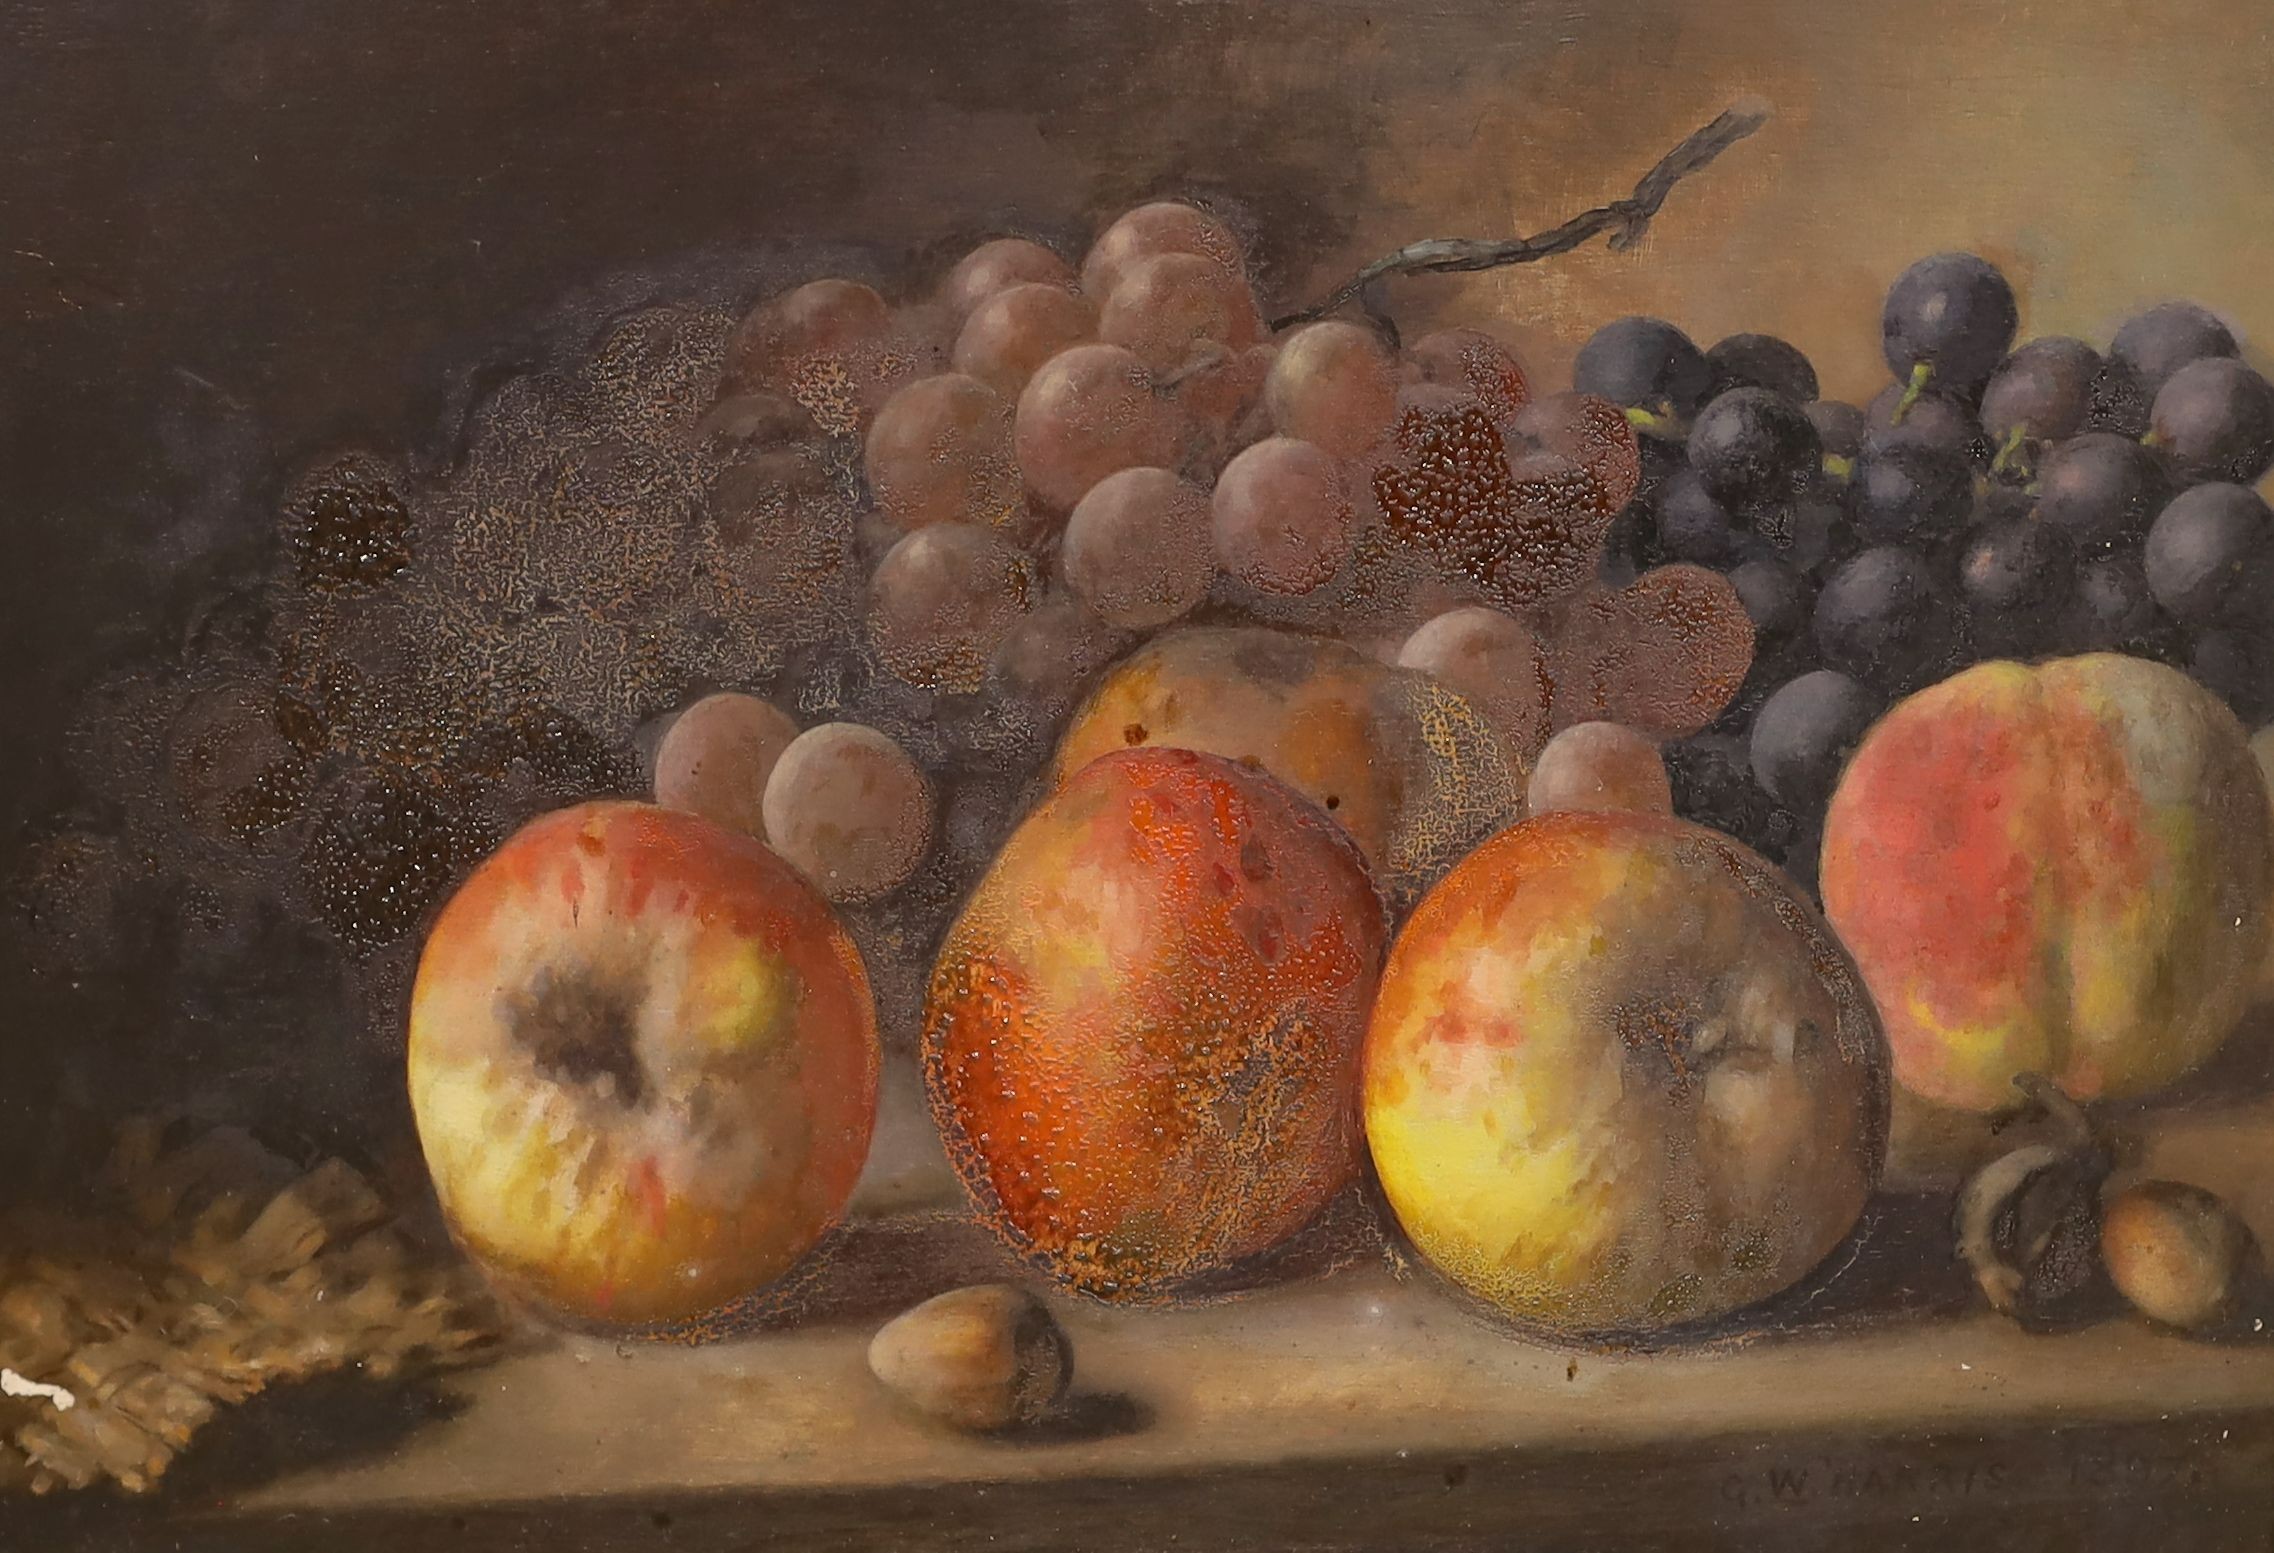 George Walter Harris (fl.1864-1893), oil on board, Still life of fruit, signed and dated 1897, 24 x 34cm